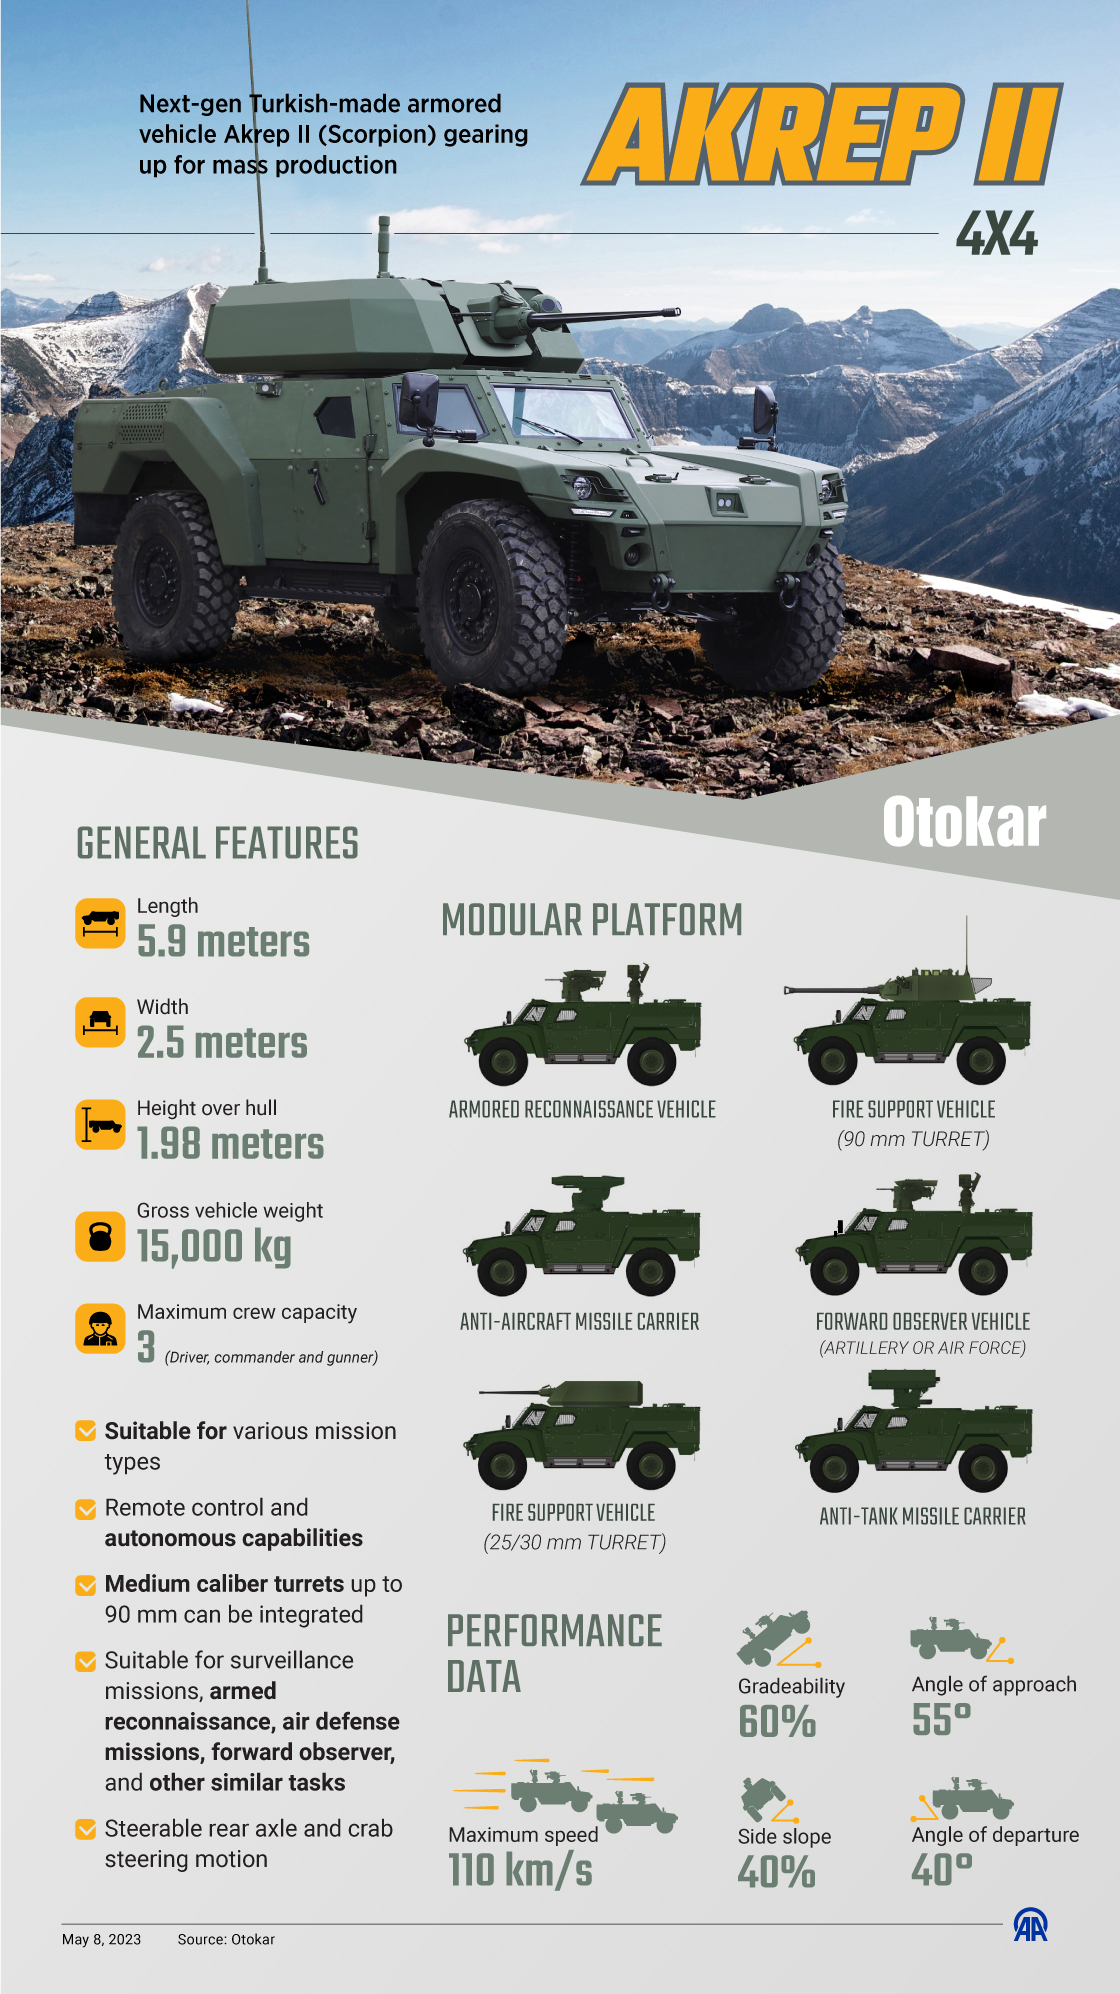 Next-gen Turkish-made armored vehicle Akrep II (Scorpion) gearing up for mass production